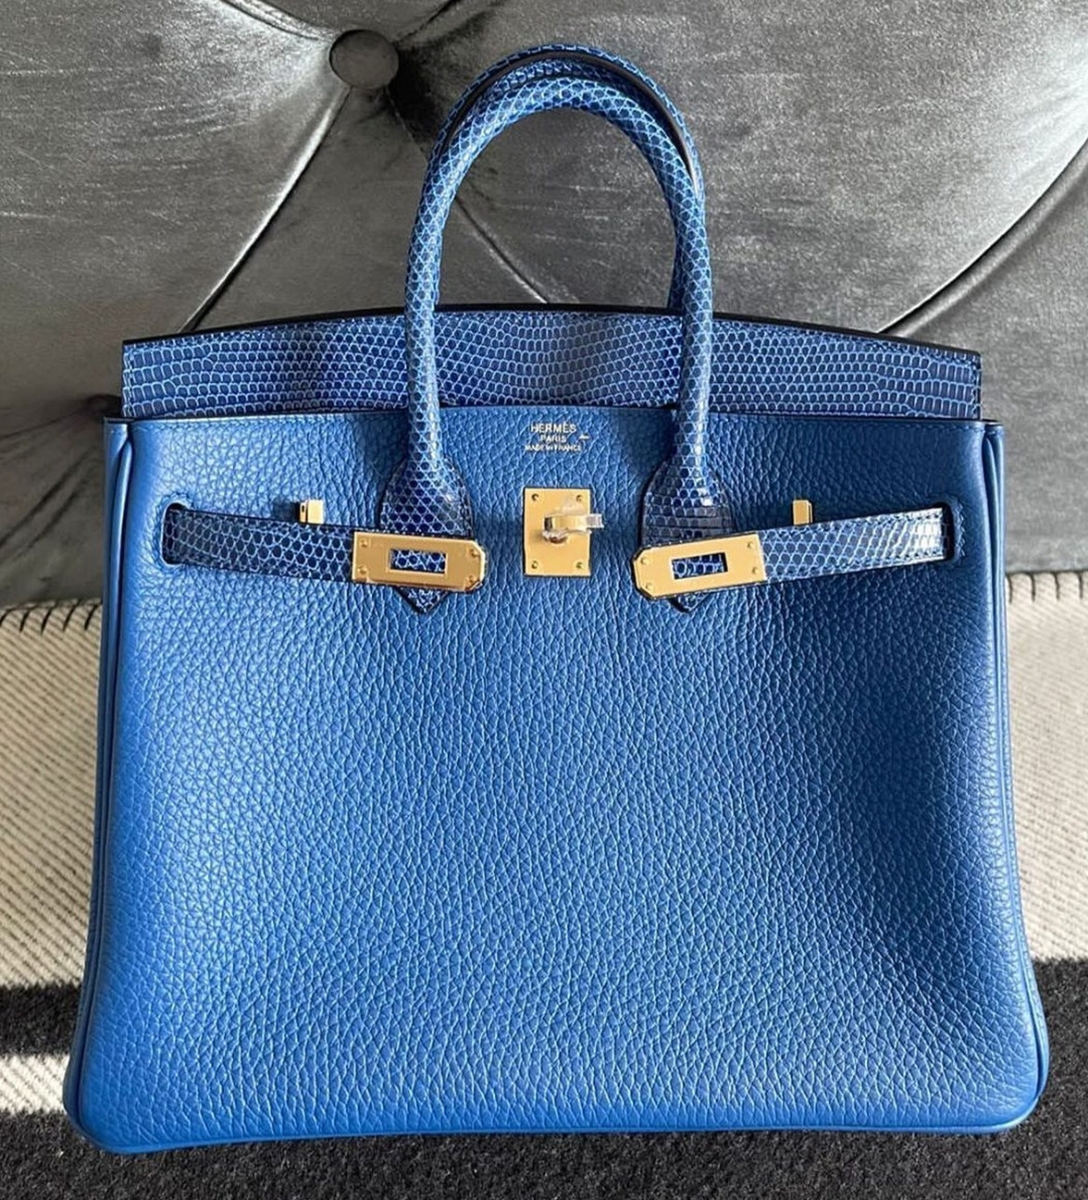 A 30cm Birkins in Bleu Royale Togo and Bleu Sapphir Lizard with GHW from July 2022. Photo courtesy of TPFer @A.Ali.